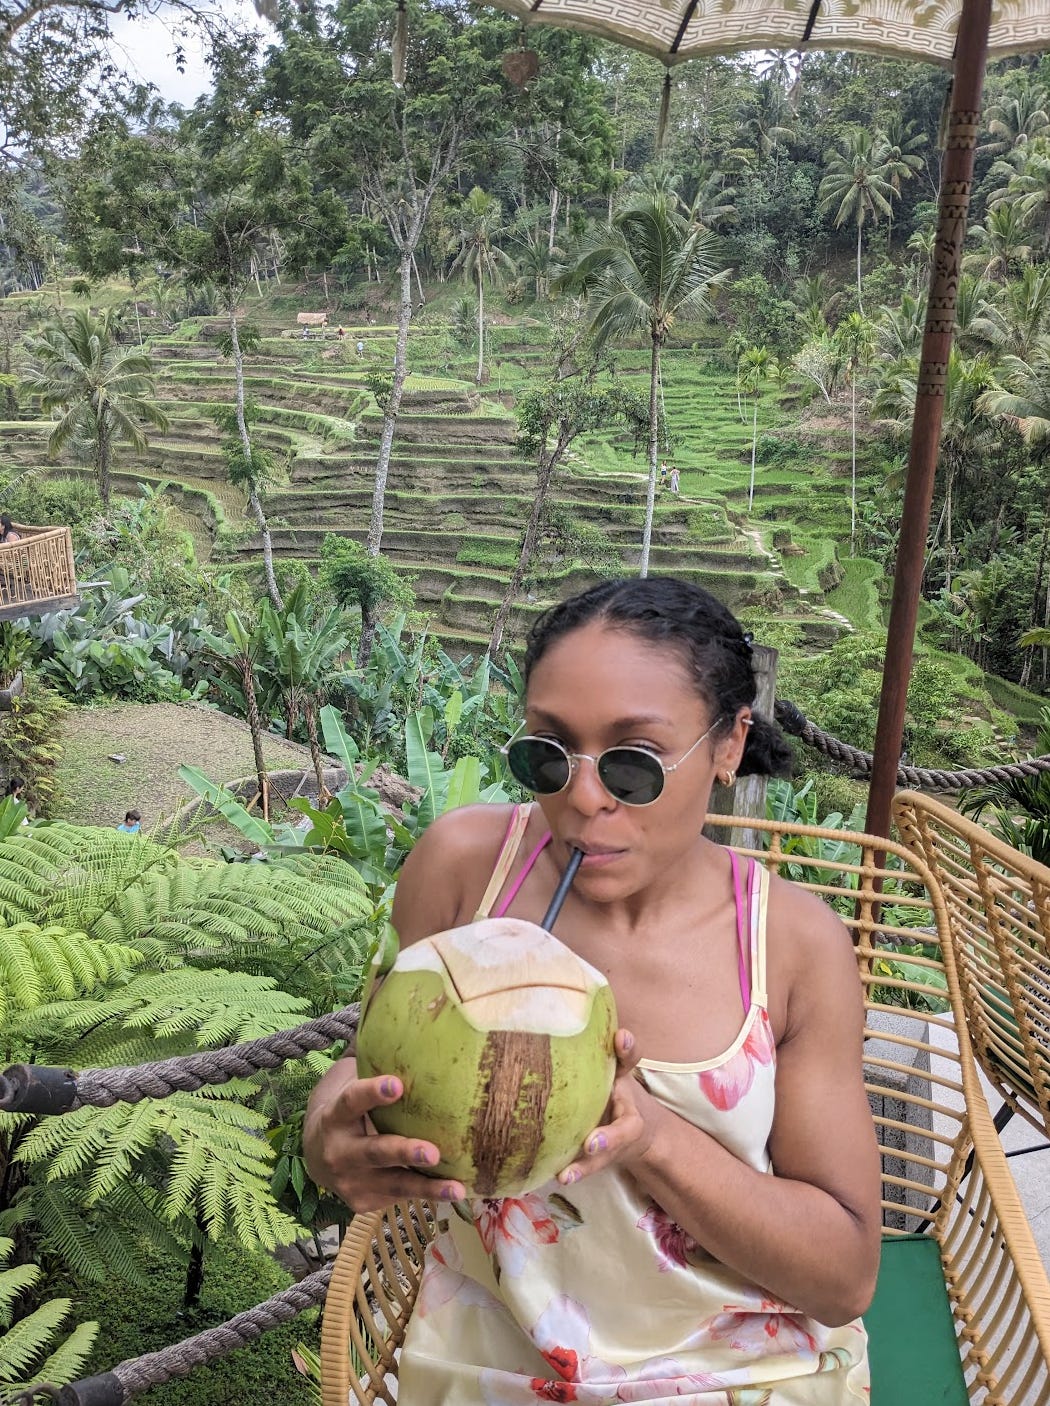 Nathalie sips on a huge coconut in front of hilly rice fields that are visible in the background. She is wearing a yellow dress that has pink flowers on it